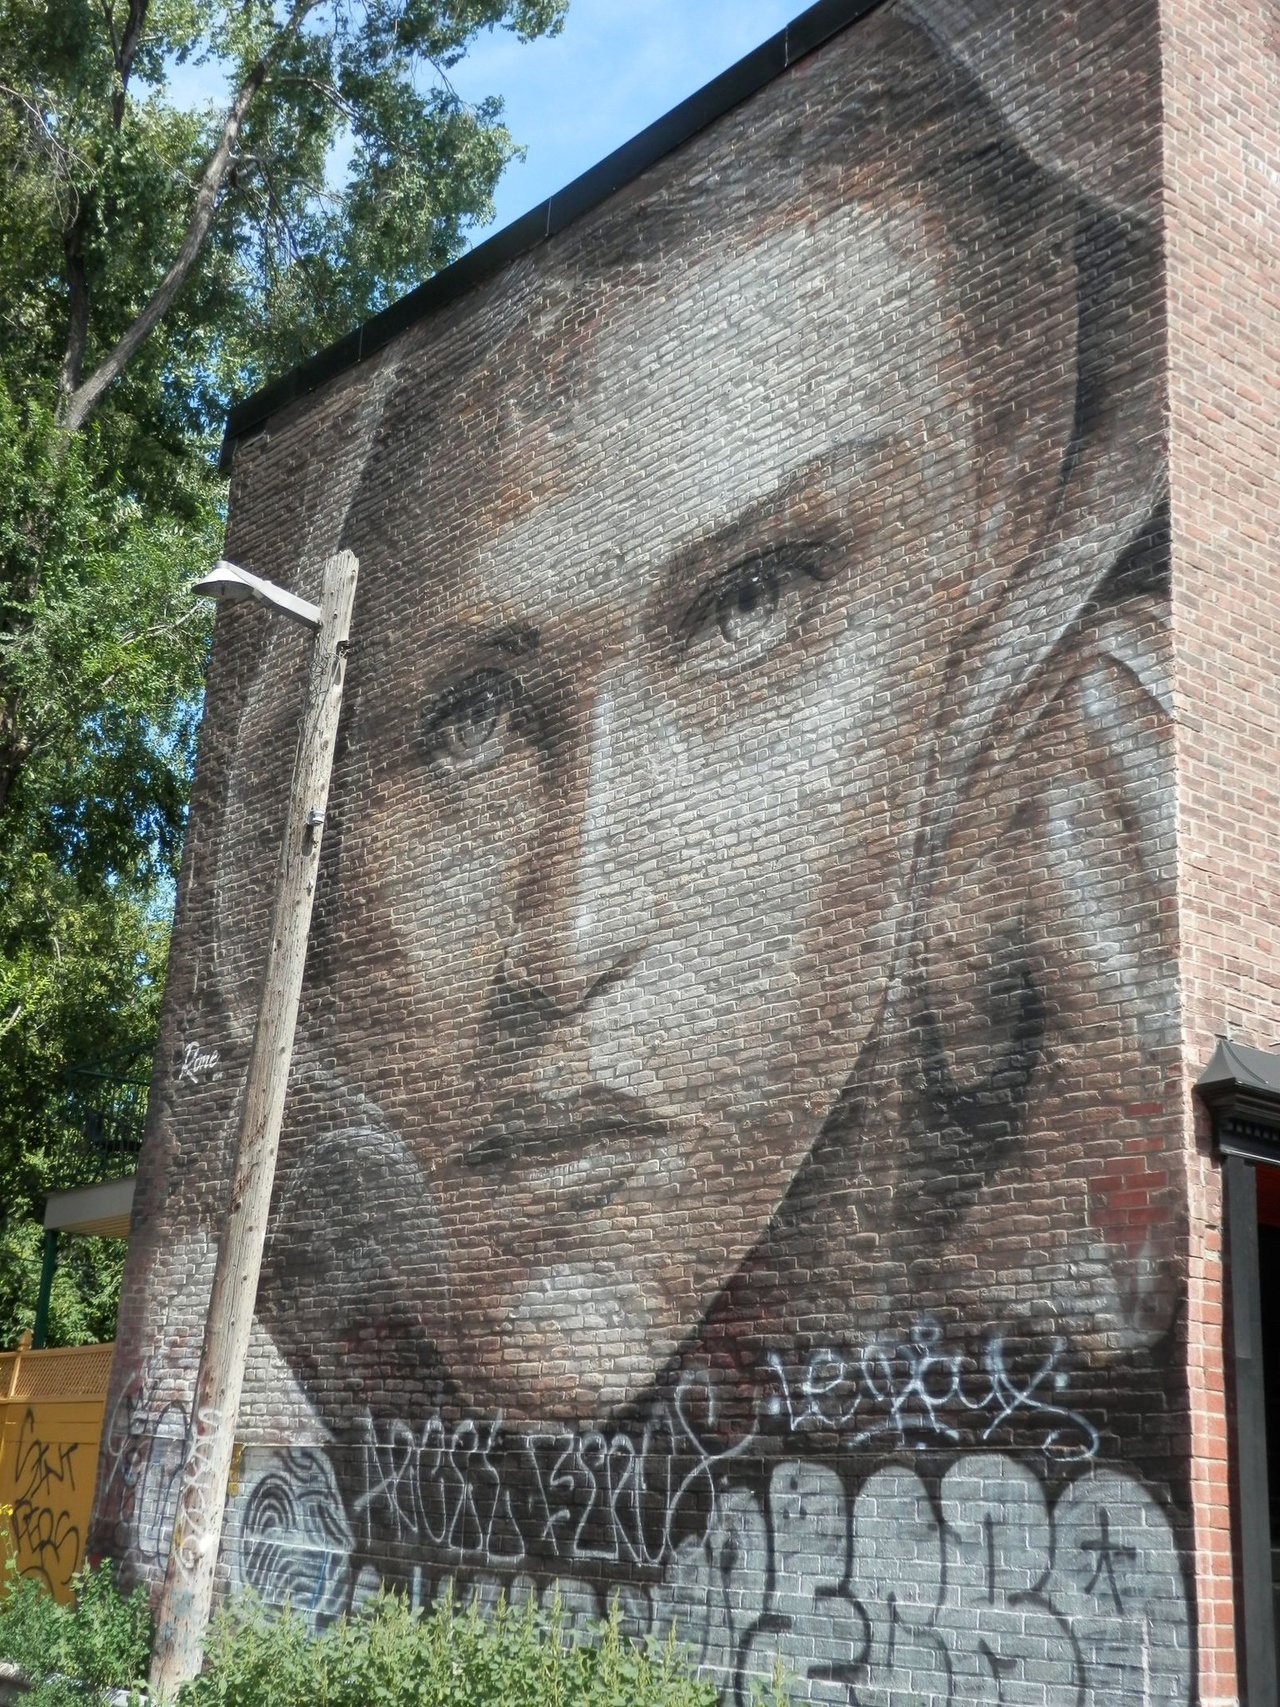 #StreetartSaturday In #Montreal I found this stunning bit of #Streetart by Rone. I did spend some hours. https://t.co/dbazopgIgI